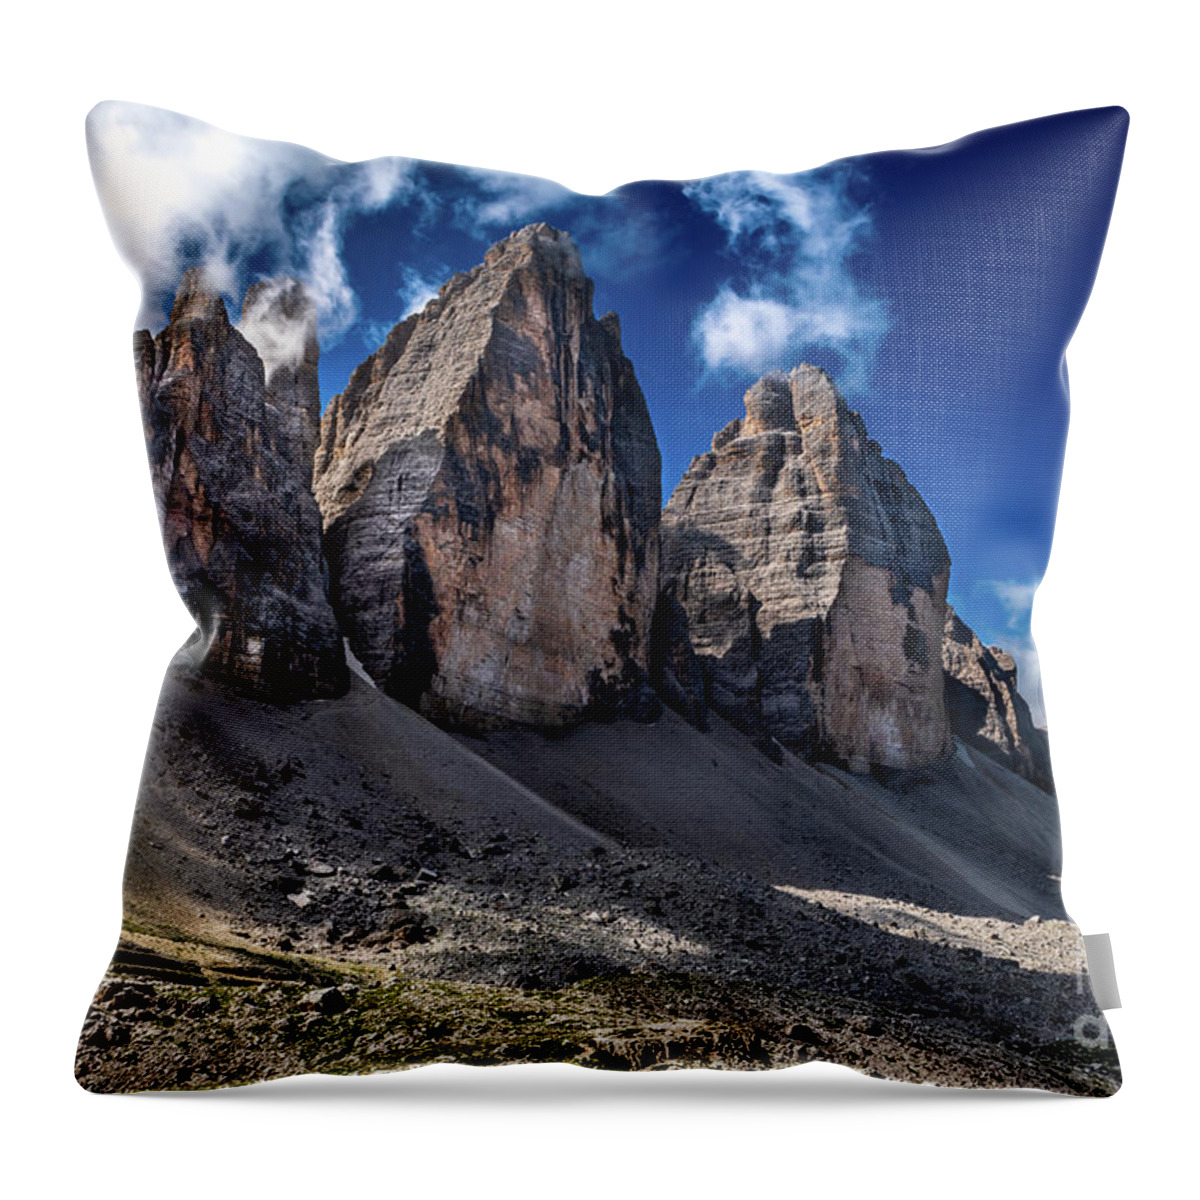 Alpine Throw Pillow featuring the photograph Mountain Formation Tre Cime Di Lavaredo In The Dolomites Of South Tirol In Italy by Andreas Berthold